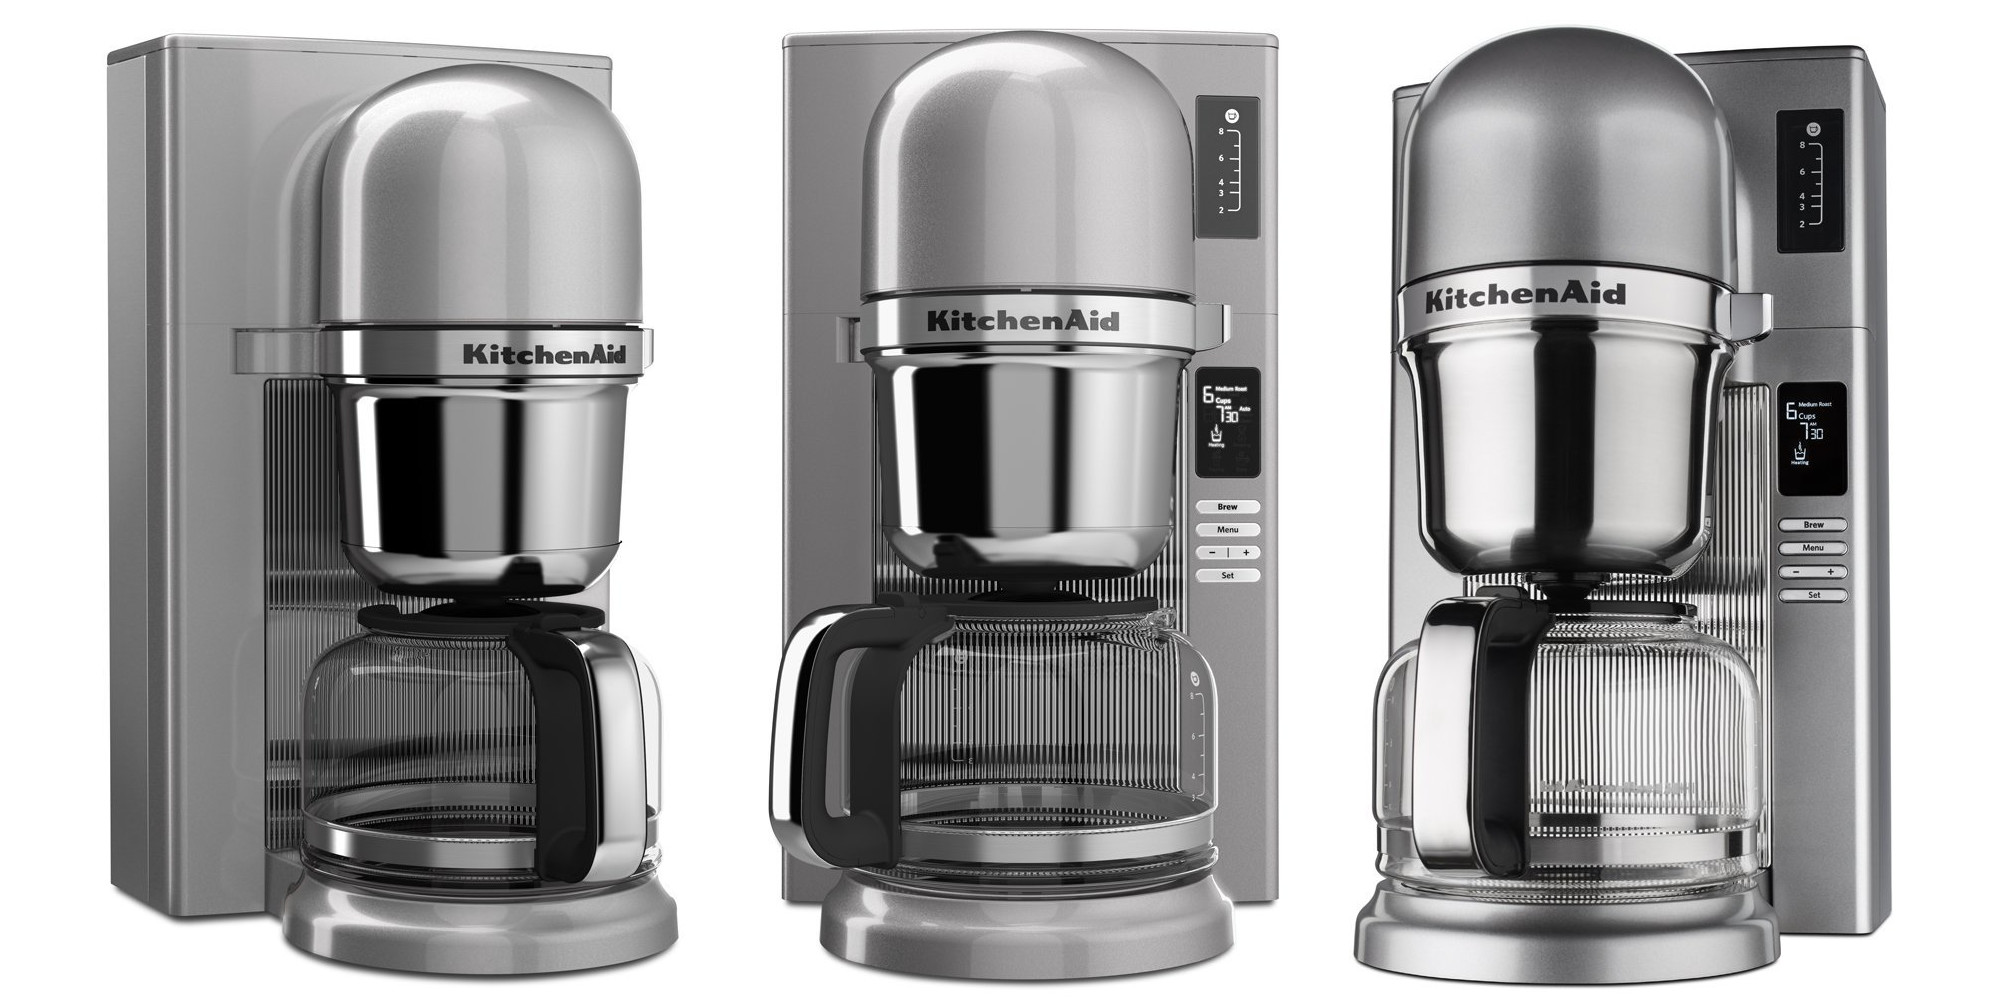 https://9to5toys.com/wp-content/uploads/sites/5/2016/06/kitchenaid-pour-over-coffee-brewer-in-contour-silver-kcm0802cu-4.jpg